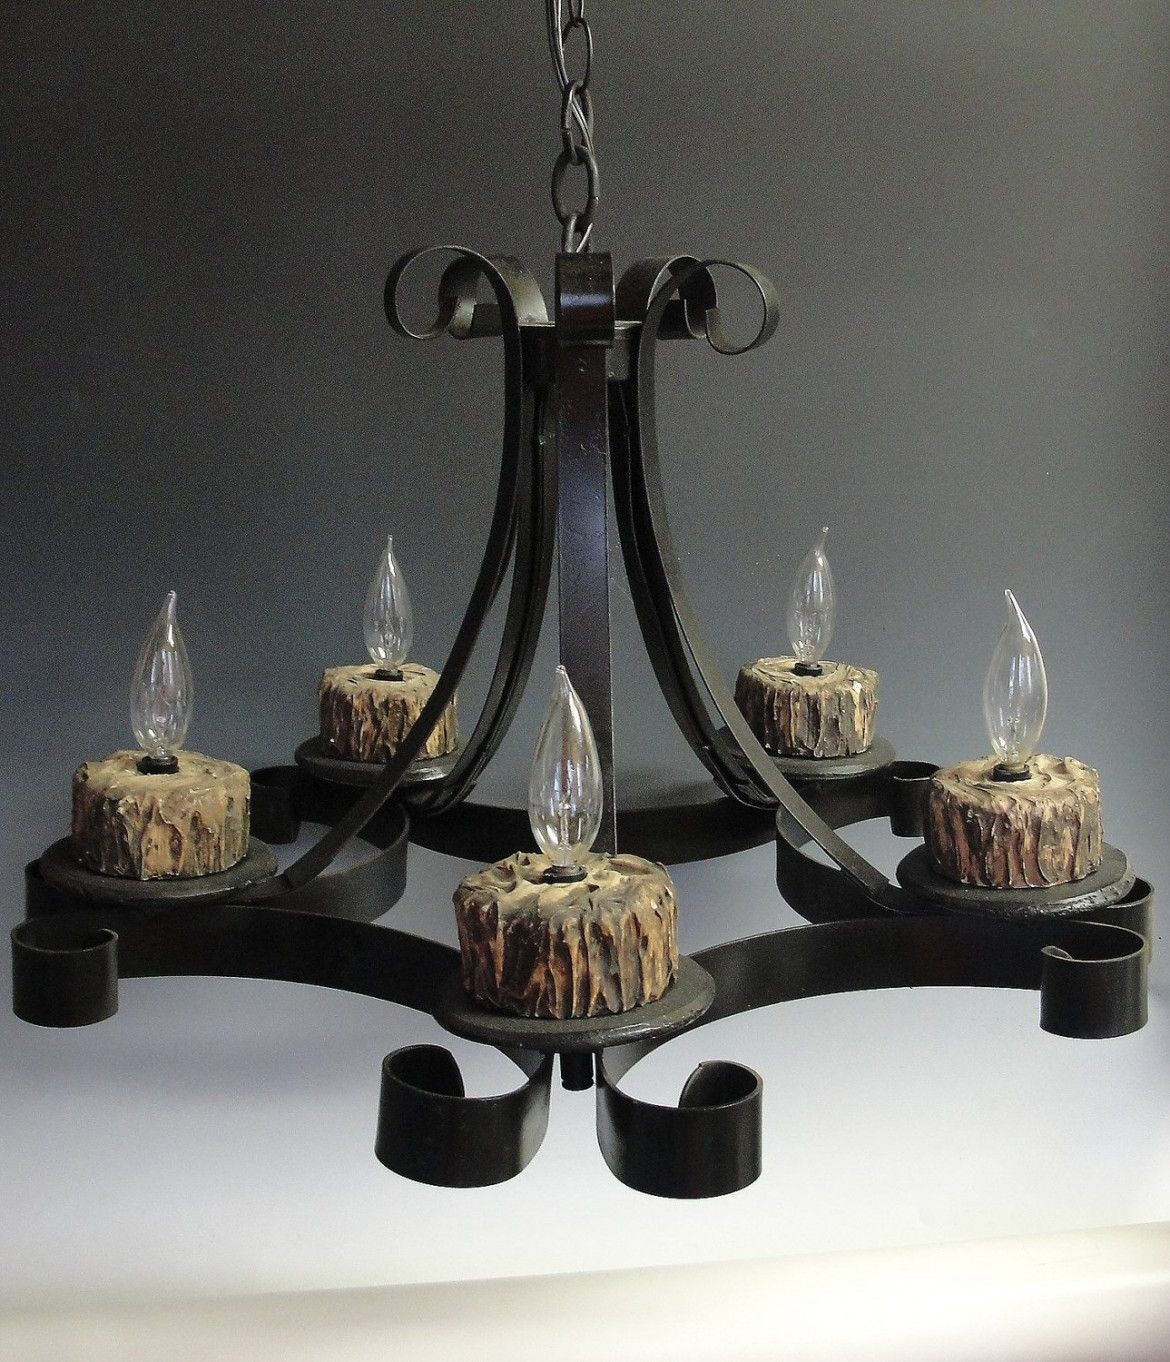 Black Wrought Iron Lighting Fixtures Roselawnlutheran In Modern Wrought Iron Chandeliers (View 10 of 12)